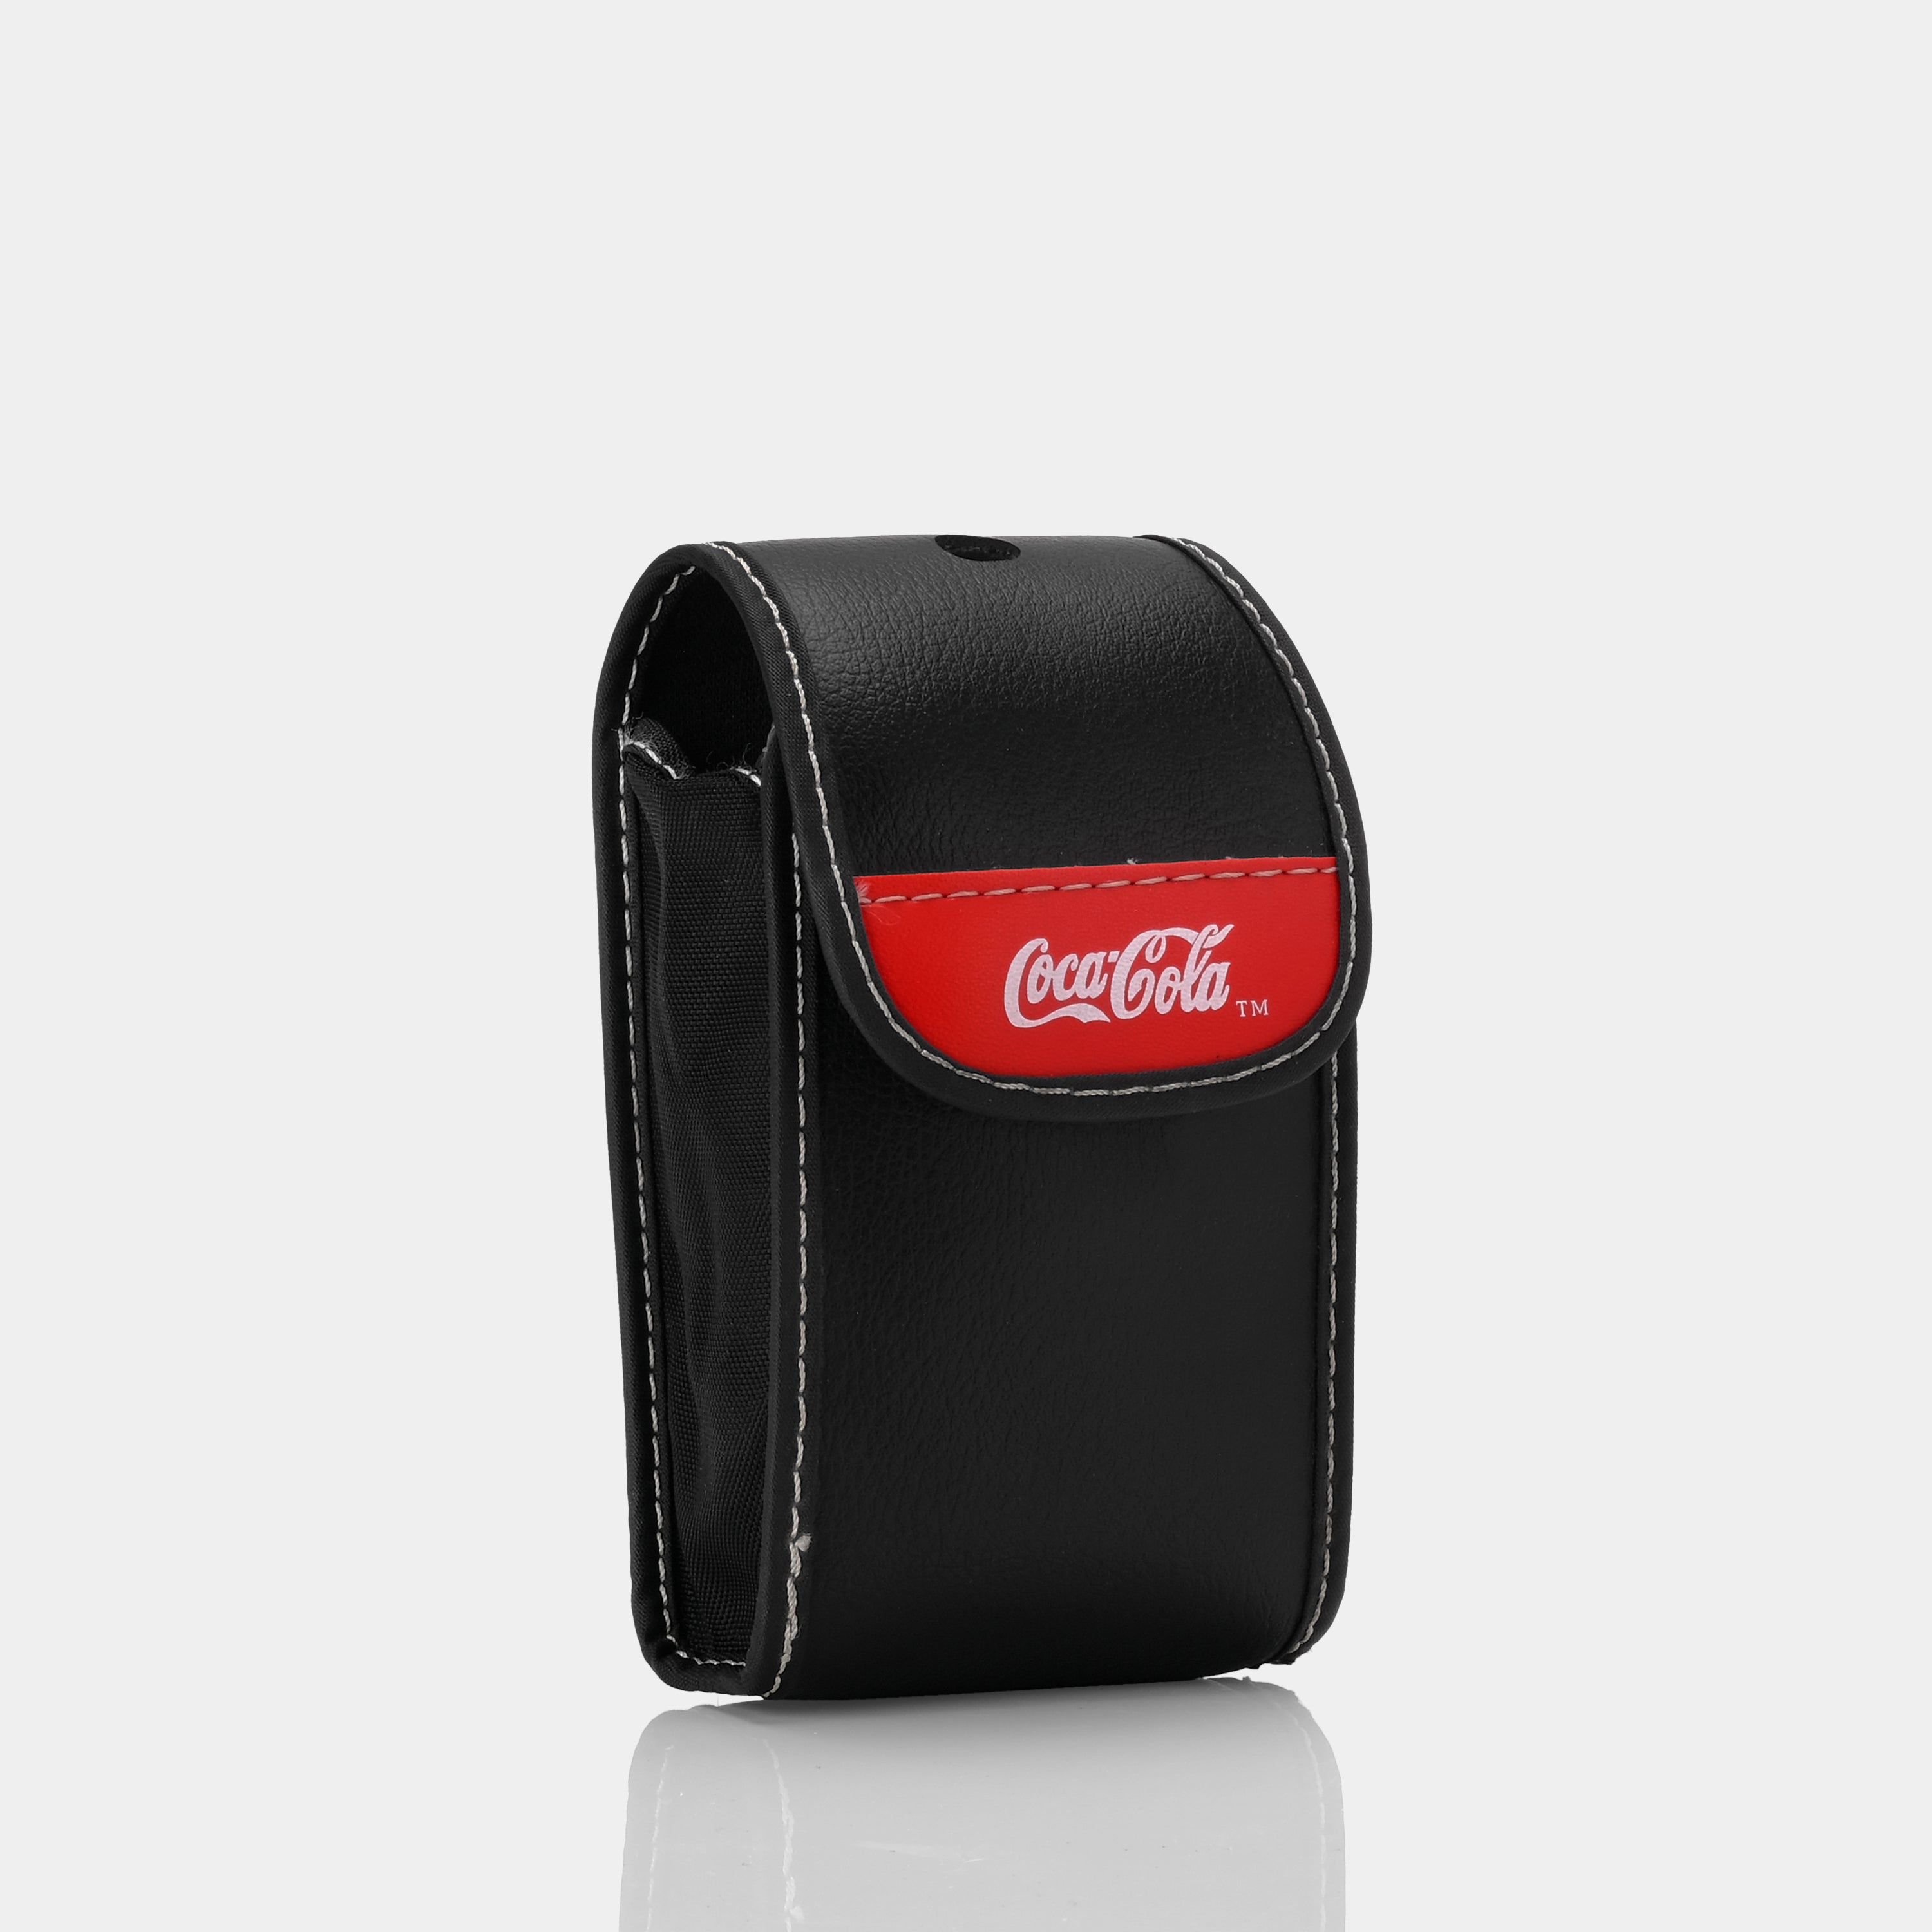 Coca-Cola Black Leather Point and Shoot Camera Case